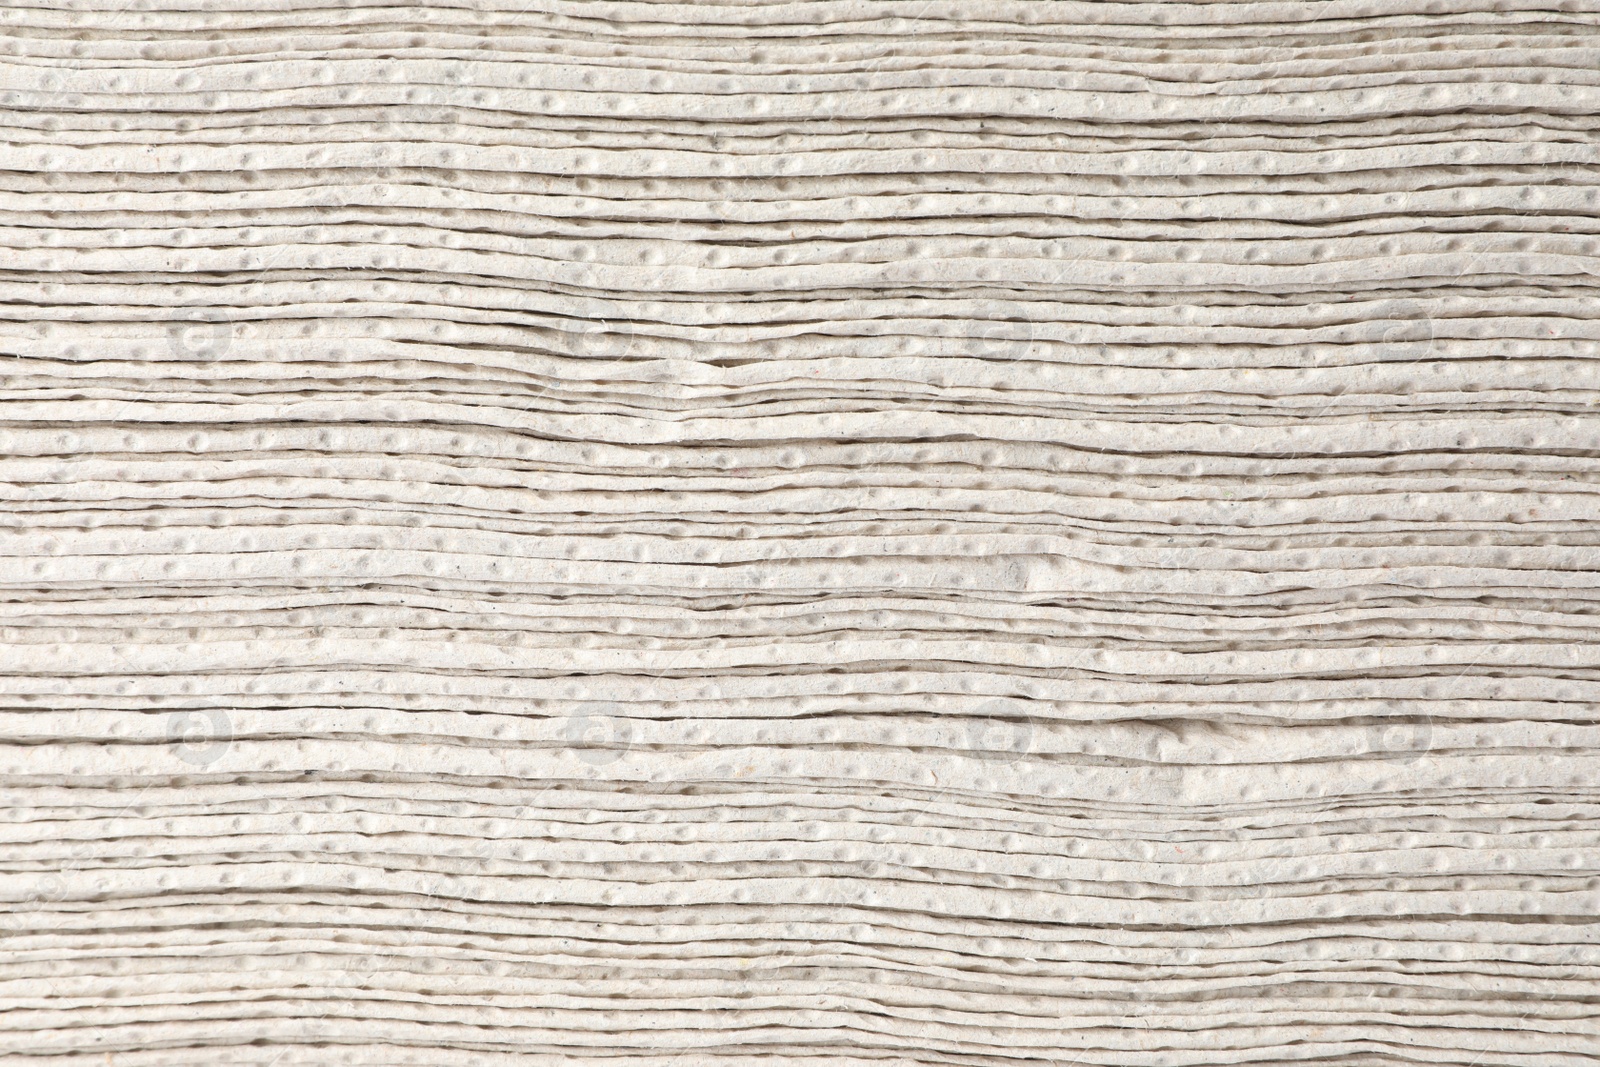 Photo of Texture staked of paper towels as background, closeup view